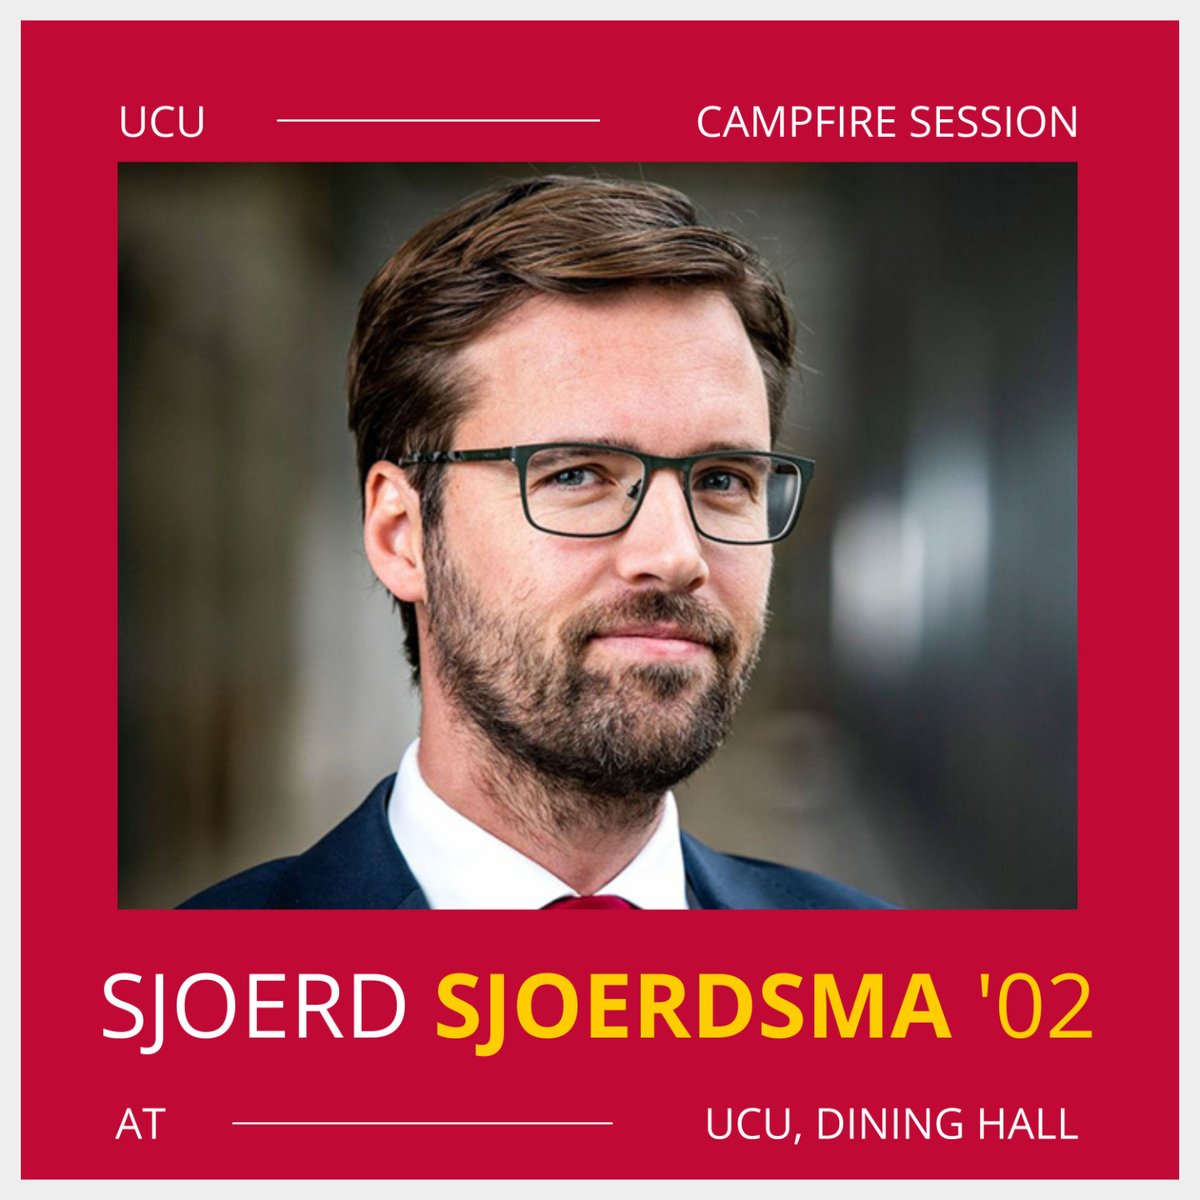 Our Alumni Office invites current and former University College Utrecht students to a new event series: UCU Campfire Sessions. First up: Parliament member and UCU alumnus Sjoerd Sjoerdsma ‘02 on Wednesday 19 October. More information on our website. uu.nl/en/events/ucu-…